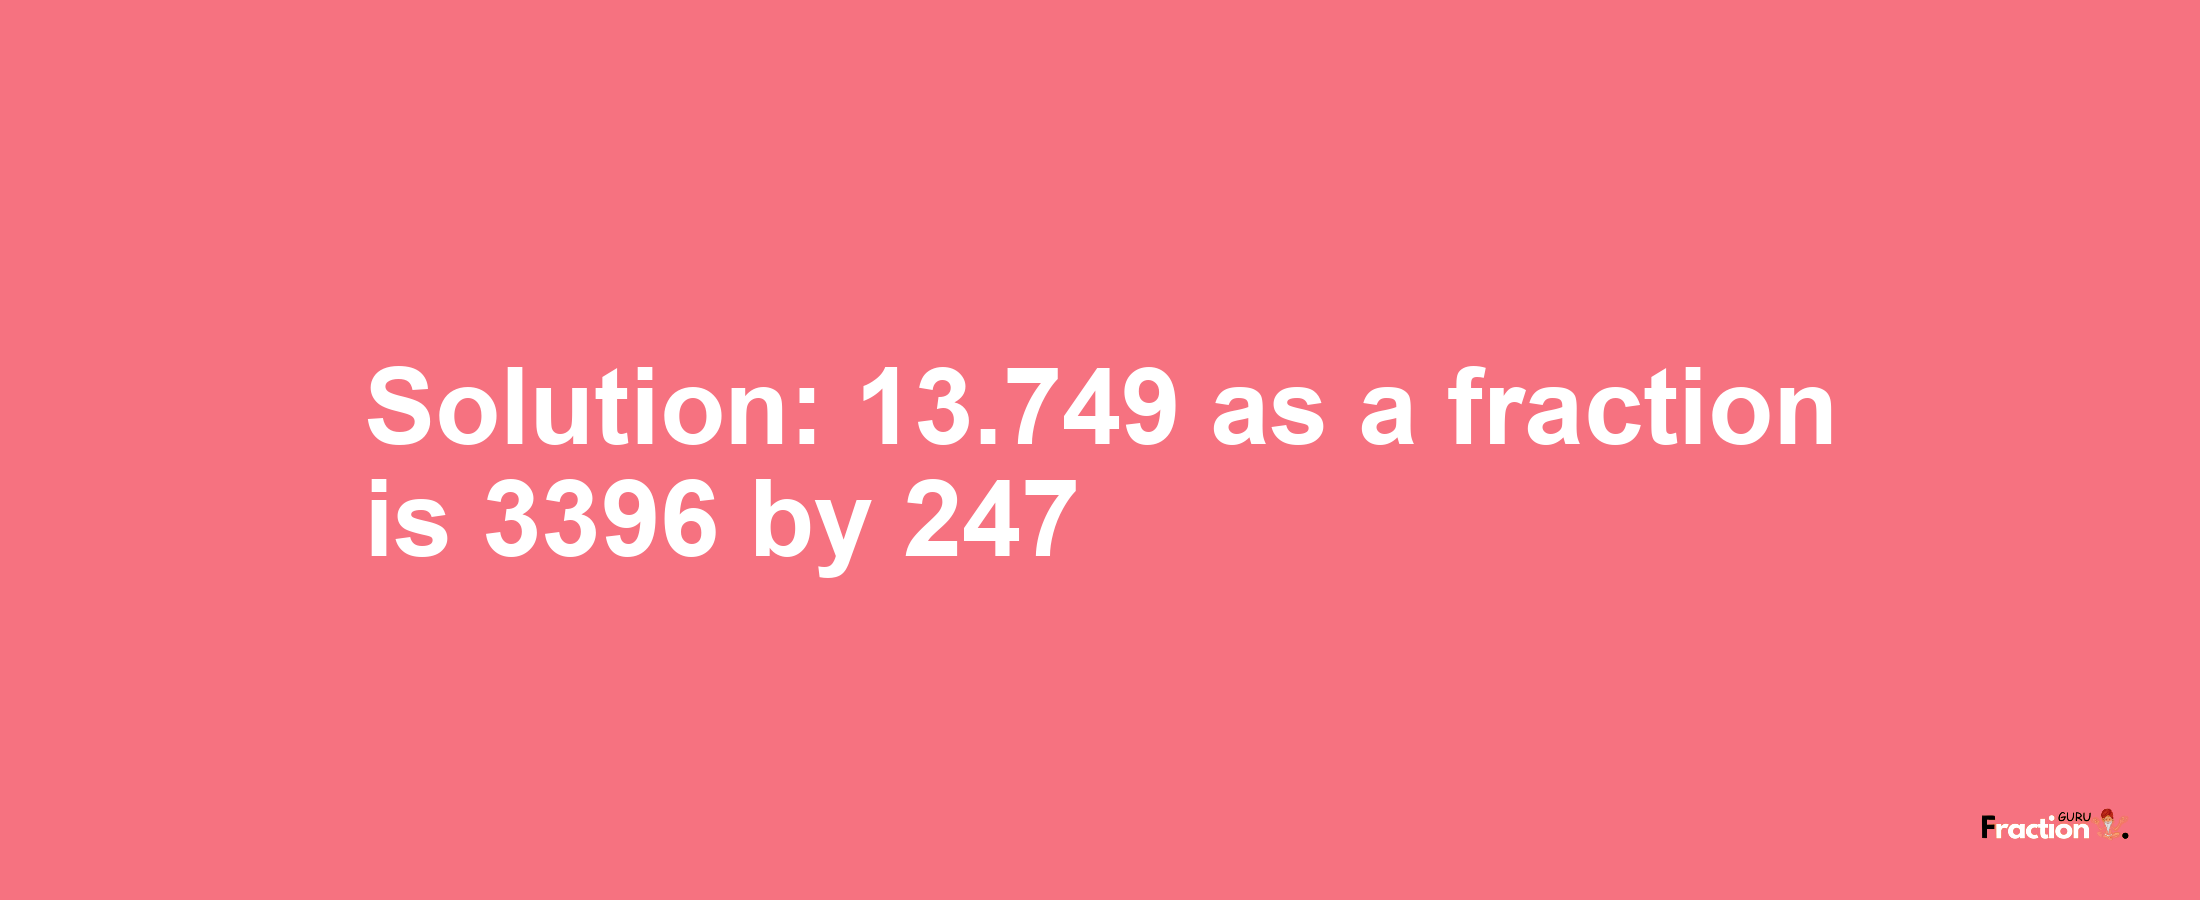 Solution:13.749 as a fraction is 3396/247